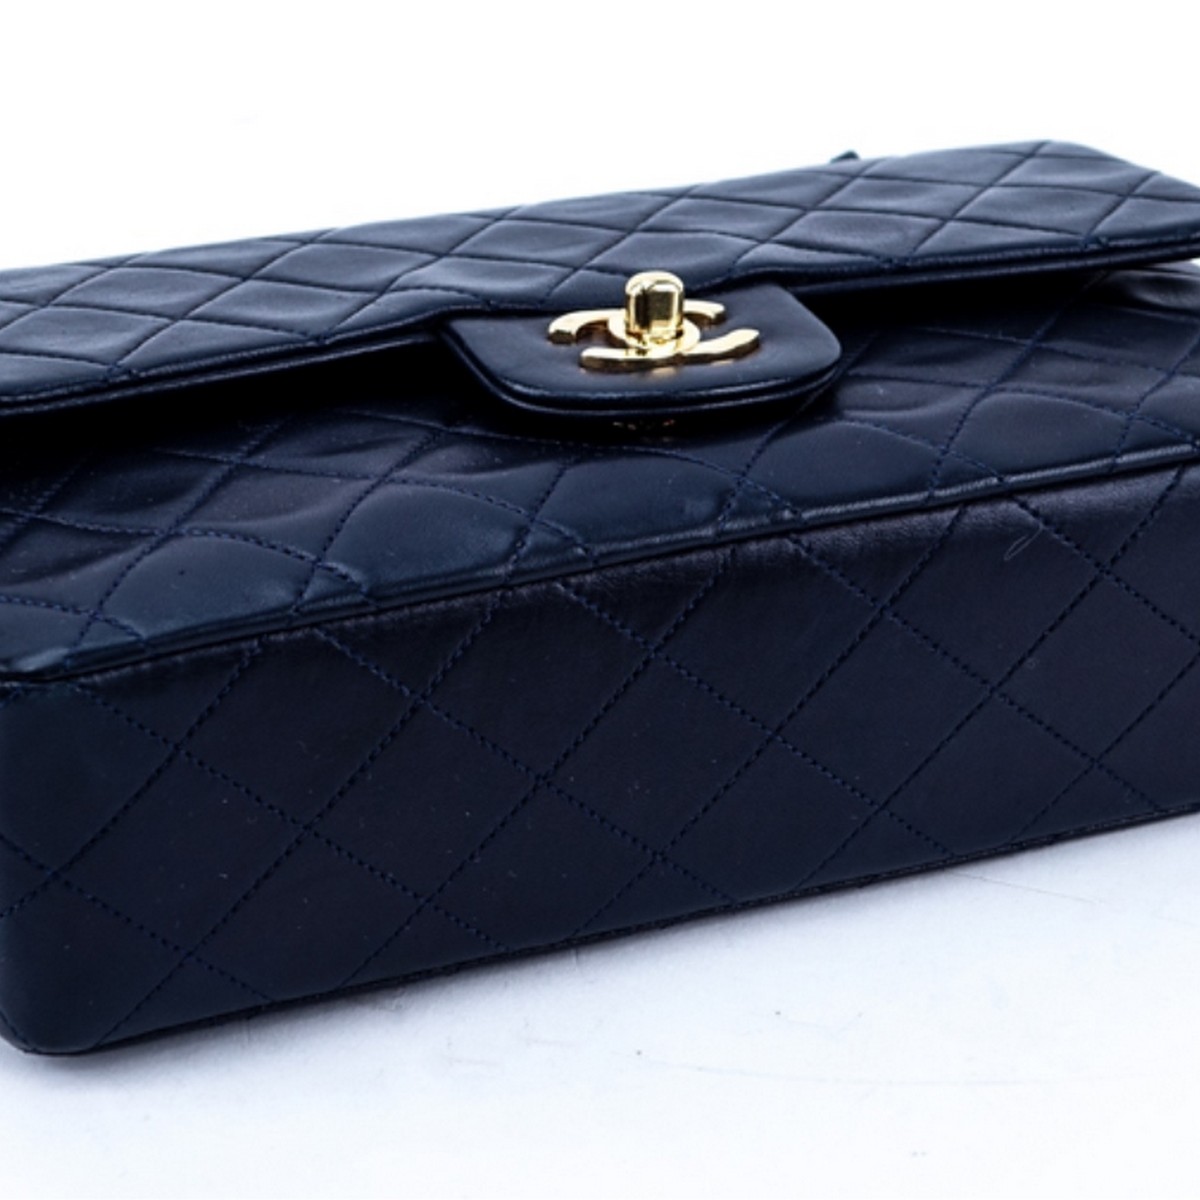 Chanel Navy Blue Quilted Leather Classic Dbl Flap